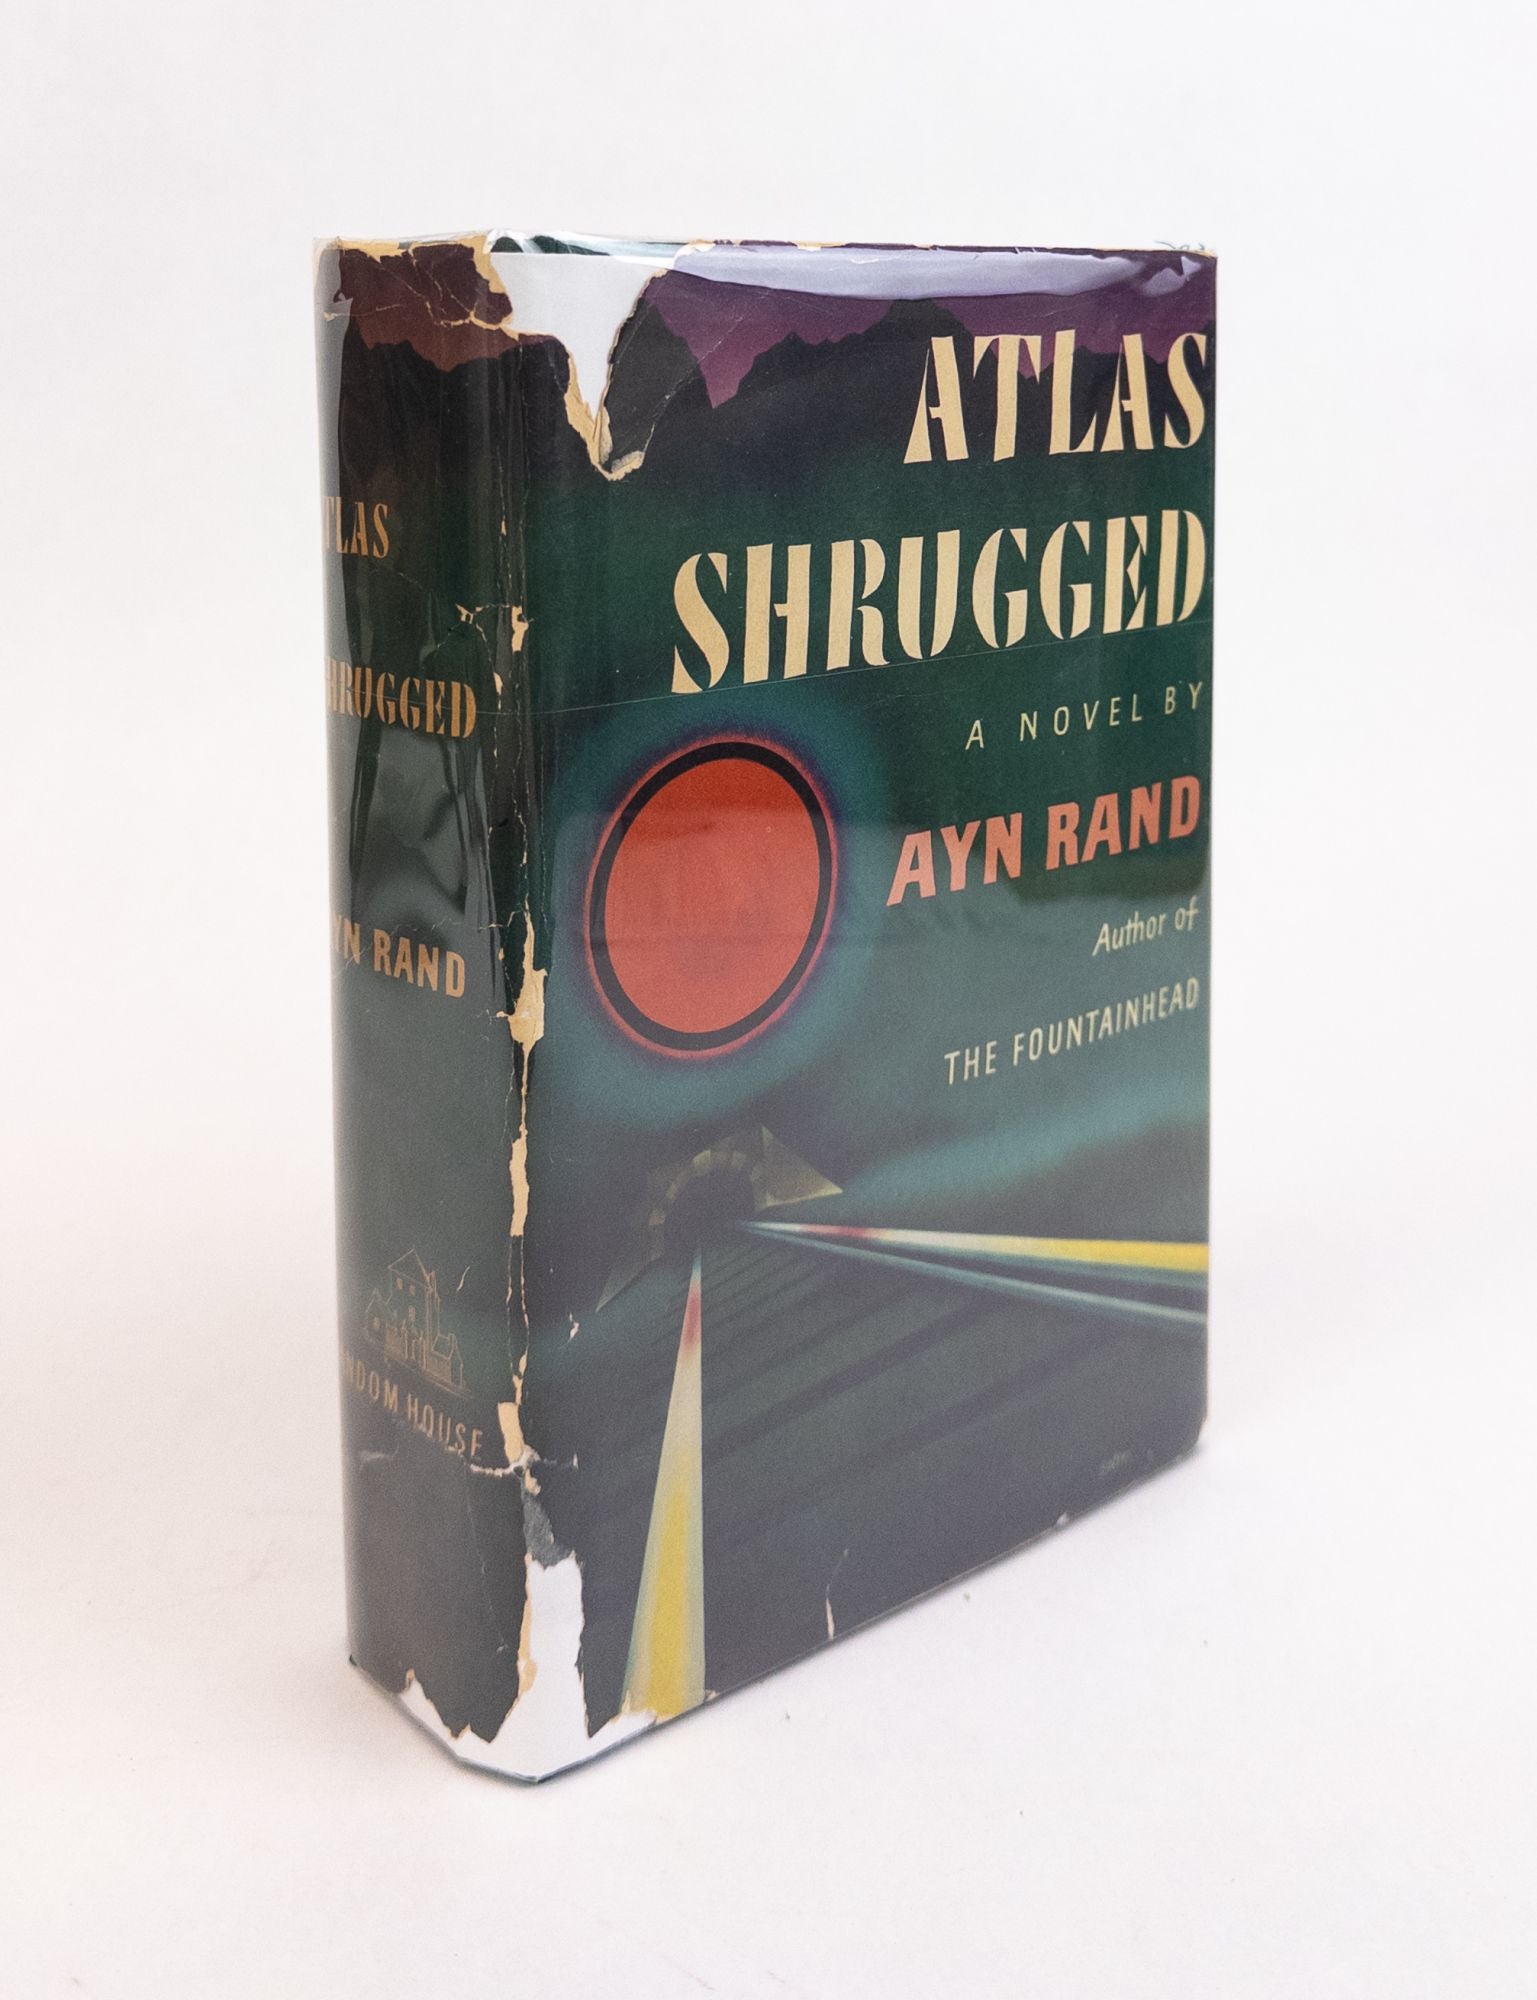 Product Image for ATLAS SHRUGGED